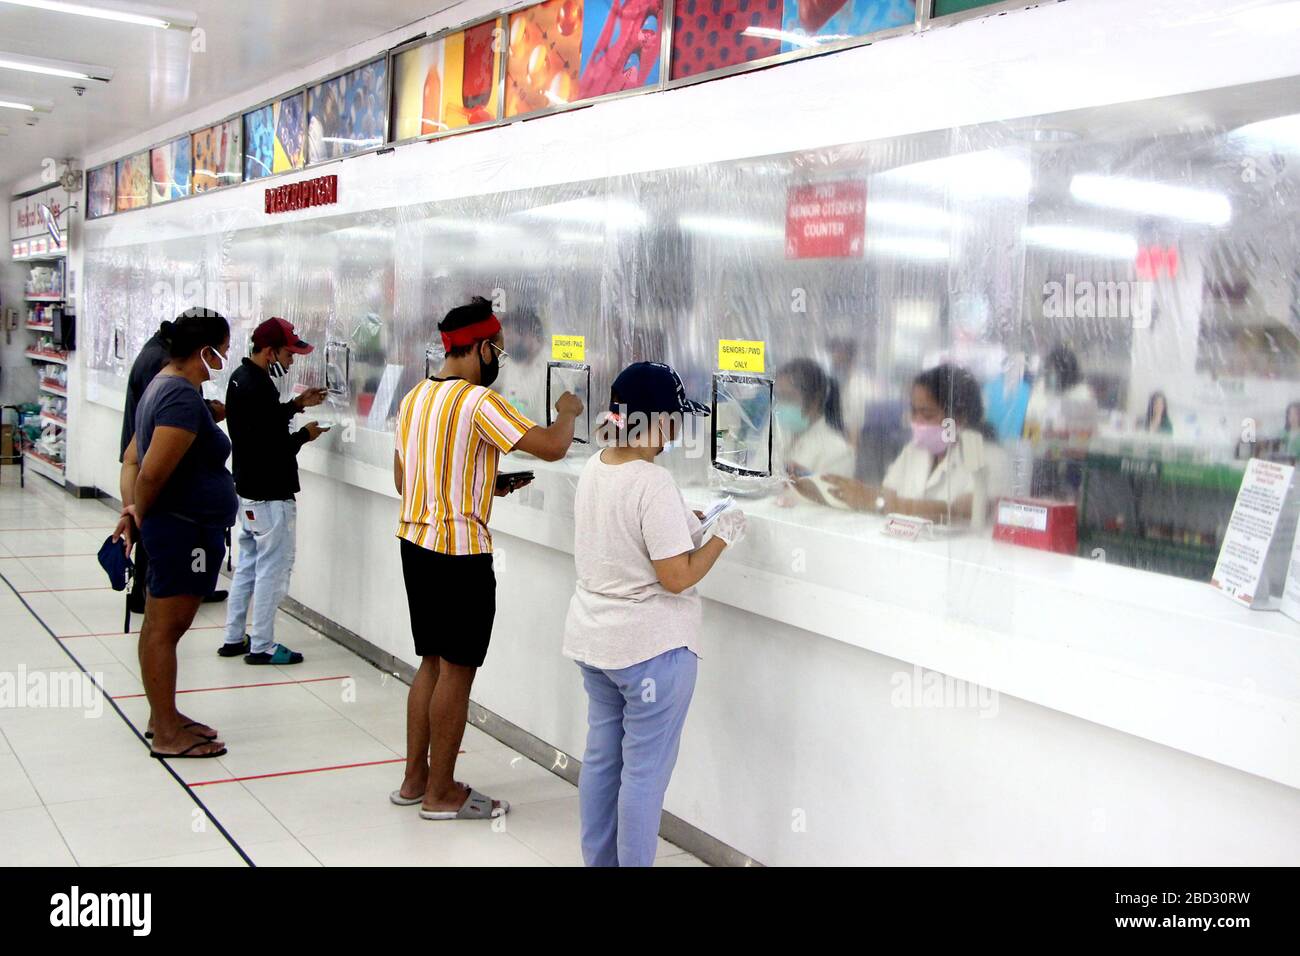 Customer's in line with the social distance rules inside of Mercury Drugs in Cainta province of Rizal on April 6, 2020. The managements cover the counters with plastics to limits the contacts of costumers and store employees to protect their self for possible infection from COVIS - 19. Local government of Rizal province declared a total lock down for not Rizal province to control the spread of the virus.Customer's in line with the social distance rules inside of Mercury Drugs in Cainta province of Rizal on April 6, 2020. The managements cover the counters with plastics to limits the contacts o Stock Photo